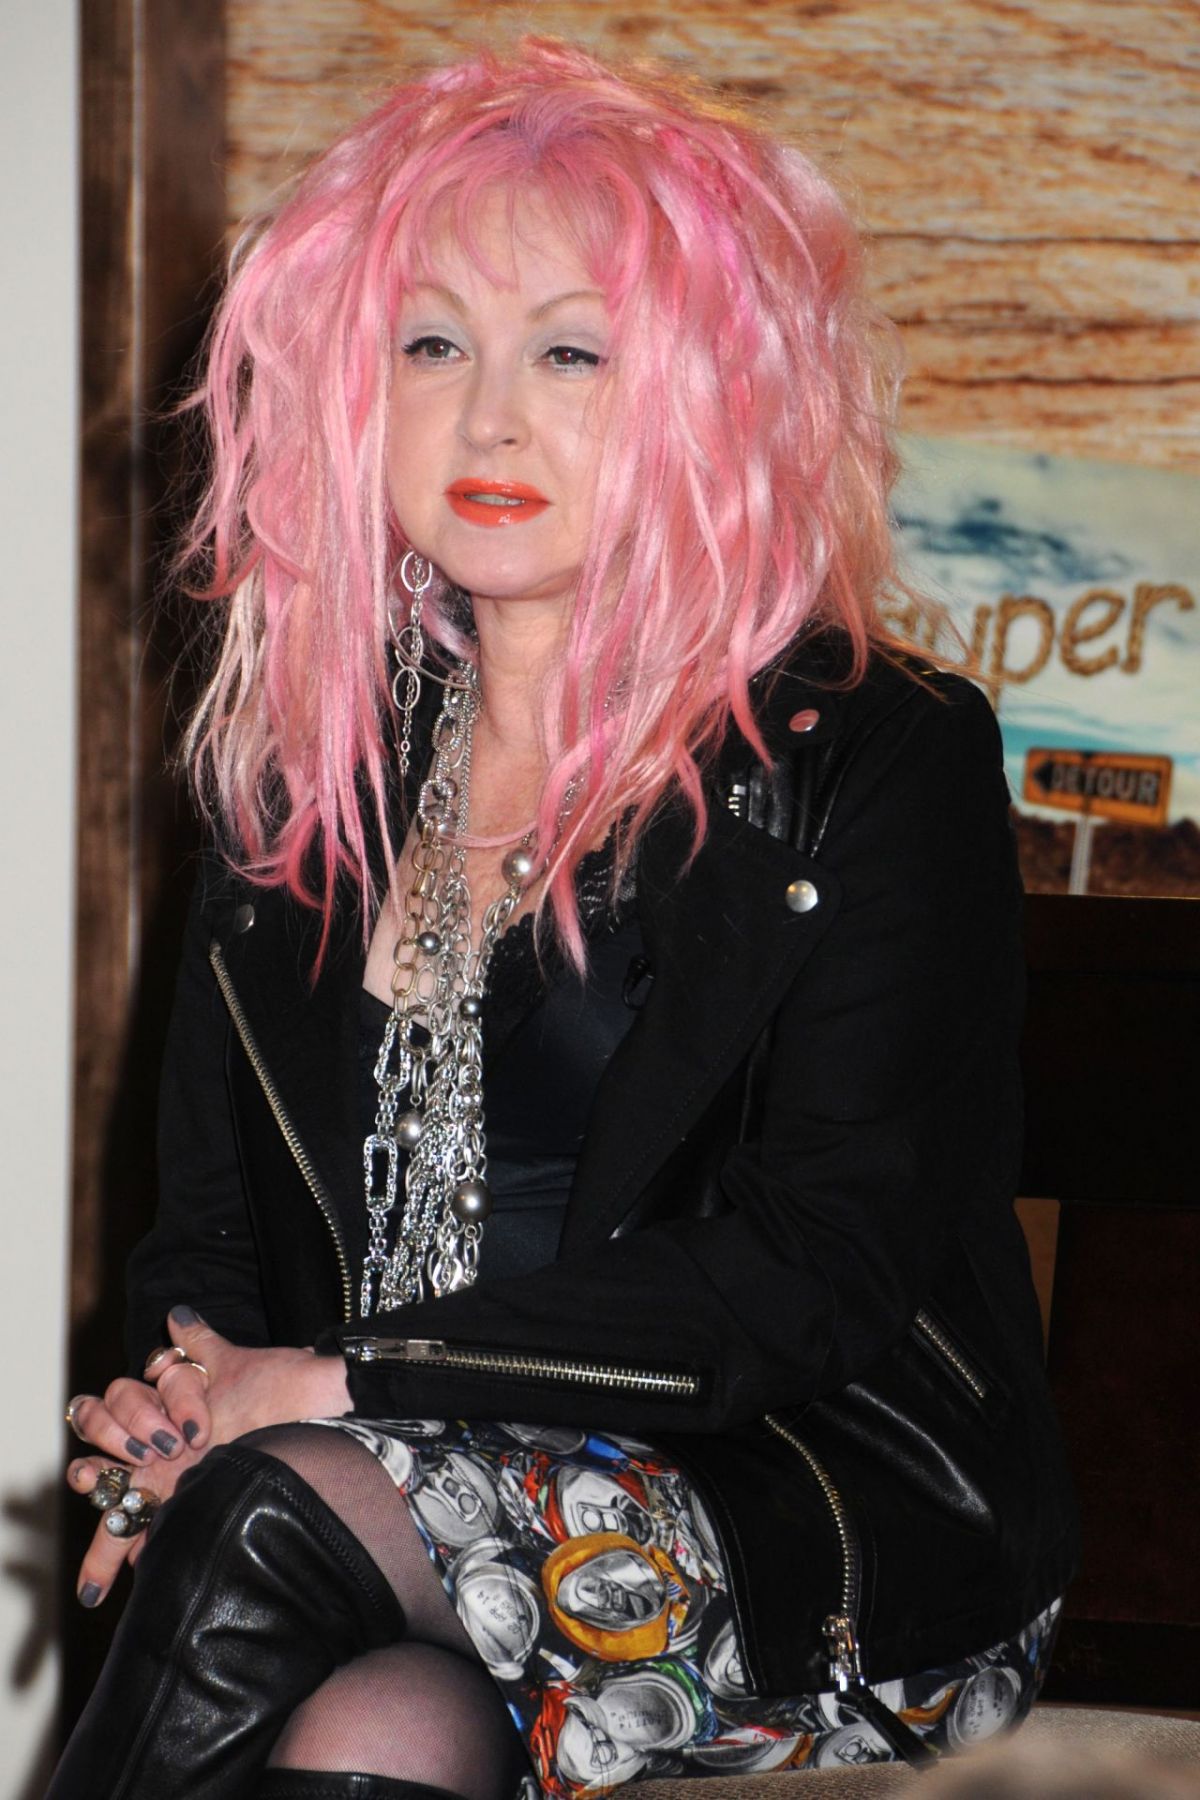 CYNDI LAUPER at Launch of New Slbum ‘Detour’ in Nashville 03/15/2016